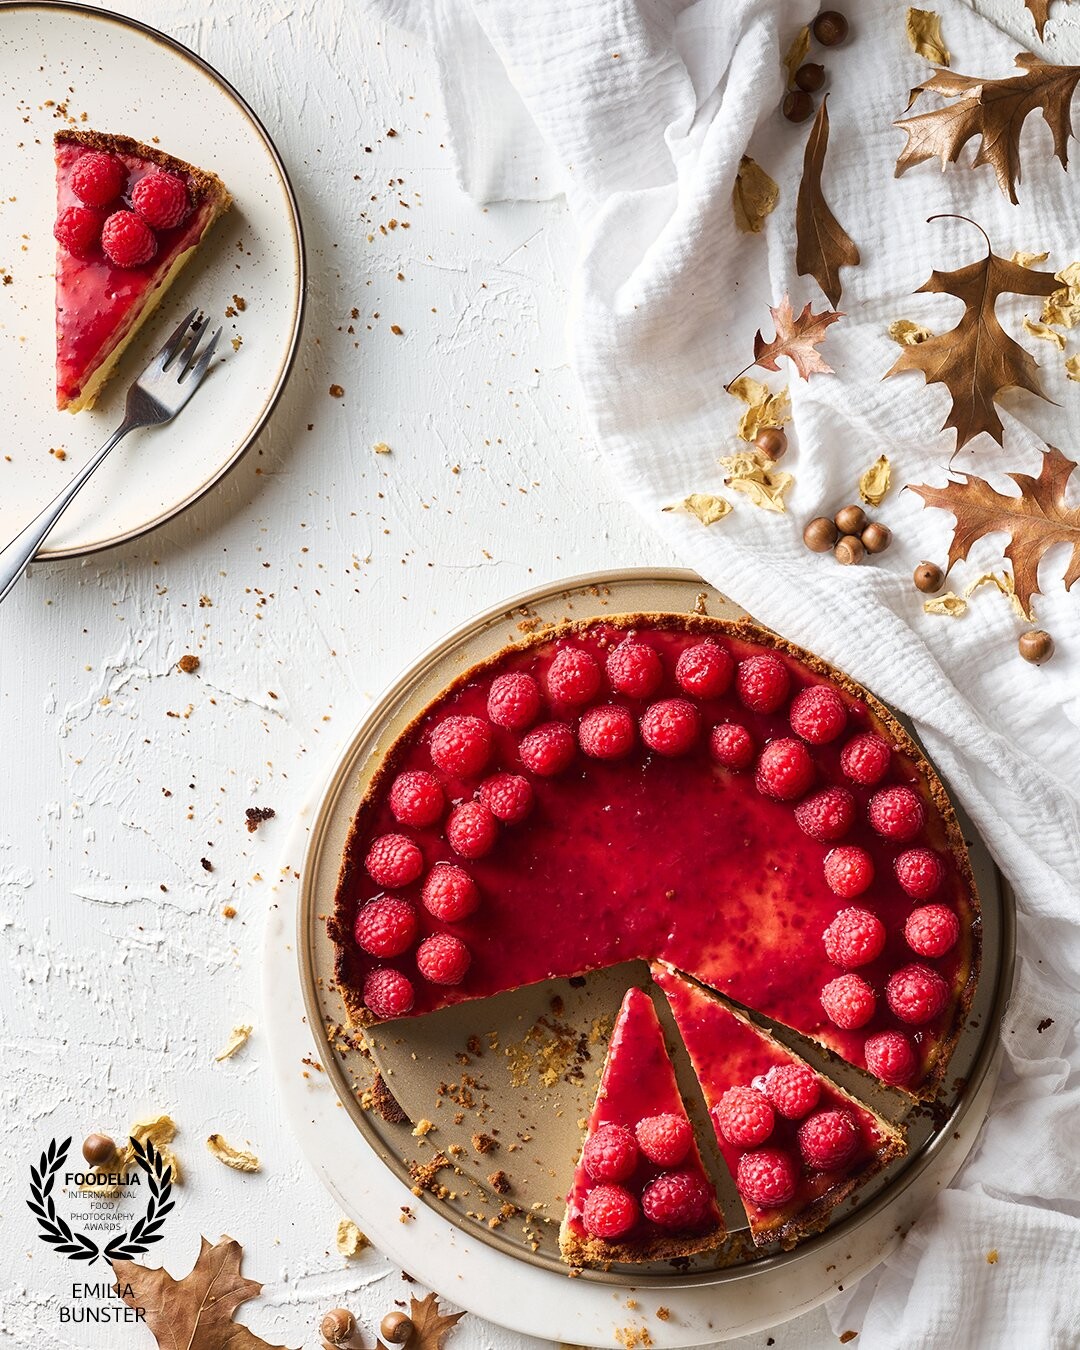 The main idea was to use a raspberry cheesecake in autumn season, trying to achieve a light and airy photograph where the red colors stand out.